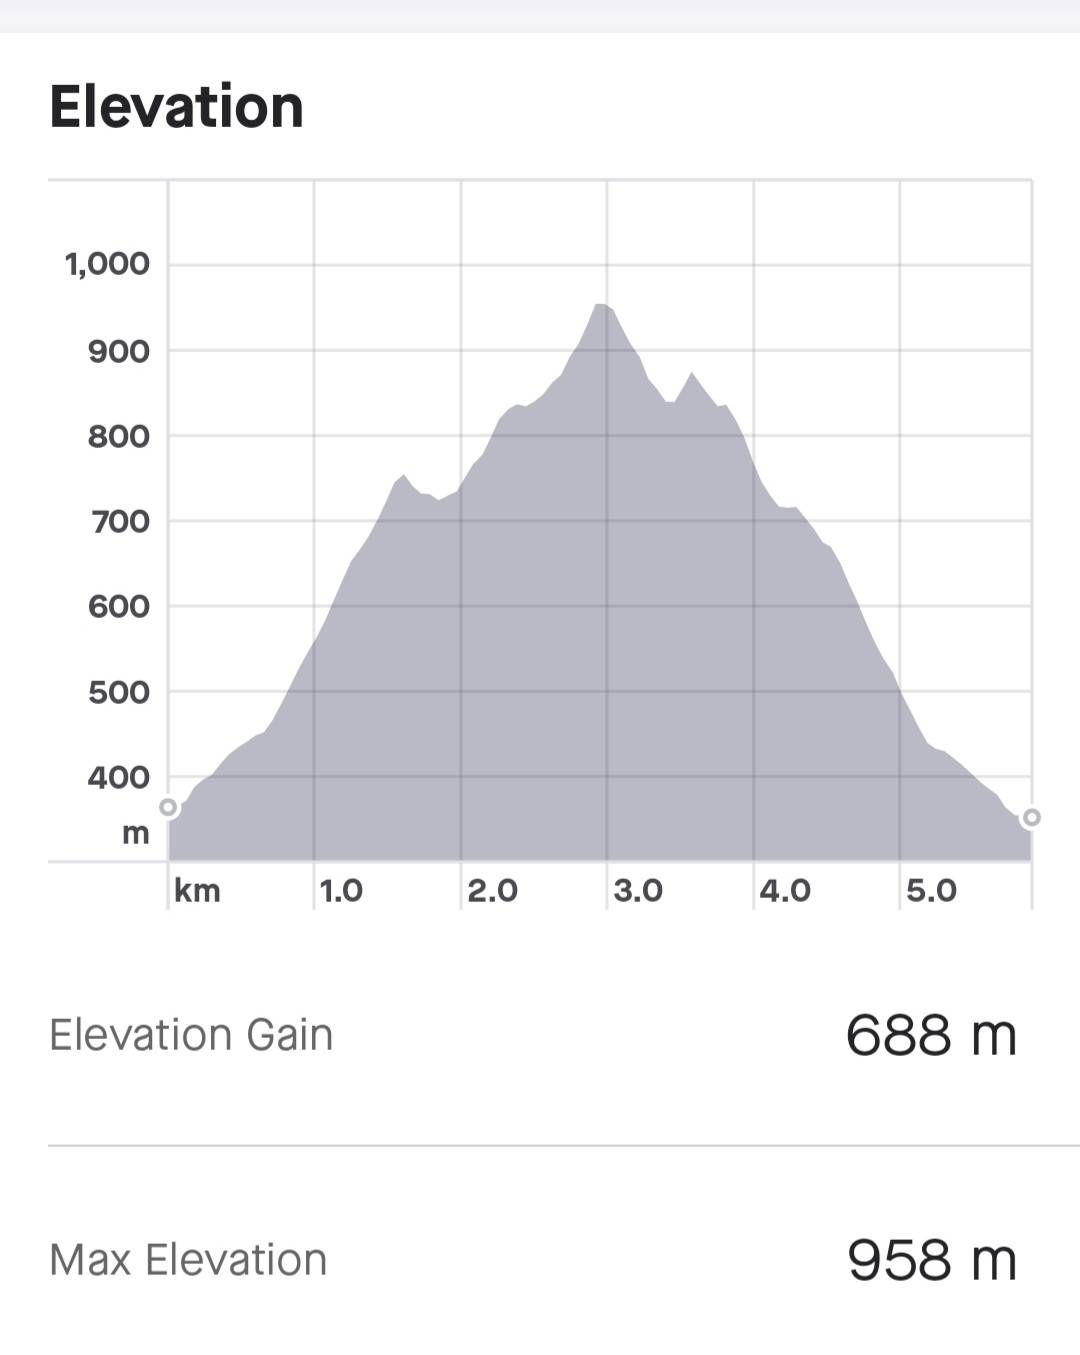 Source: Strava elevation guide. Needless to say, it was a tough hike!